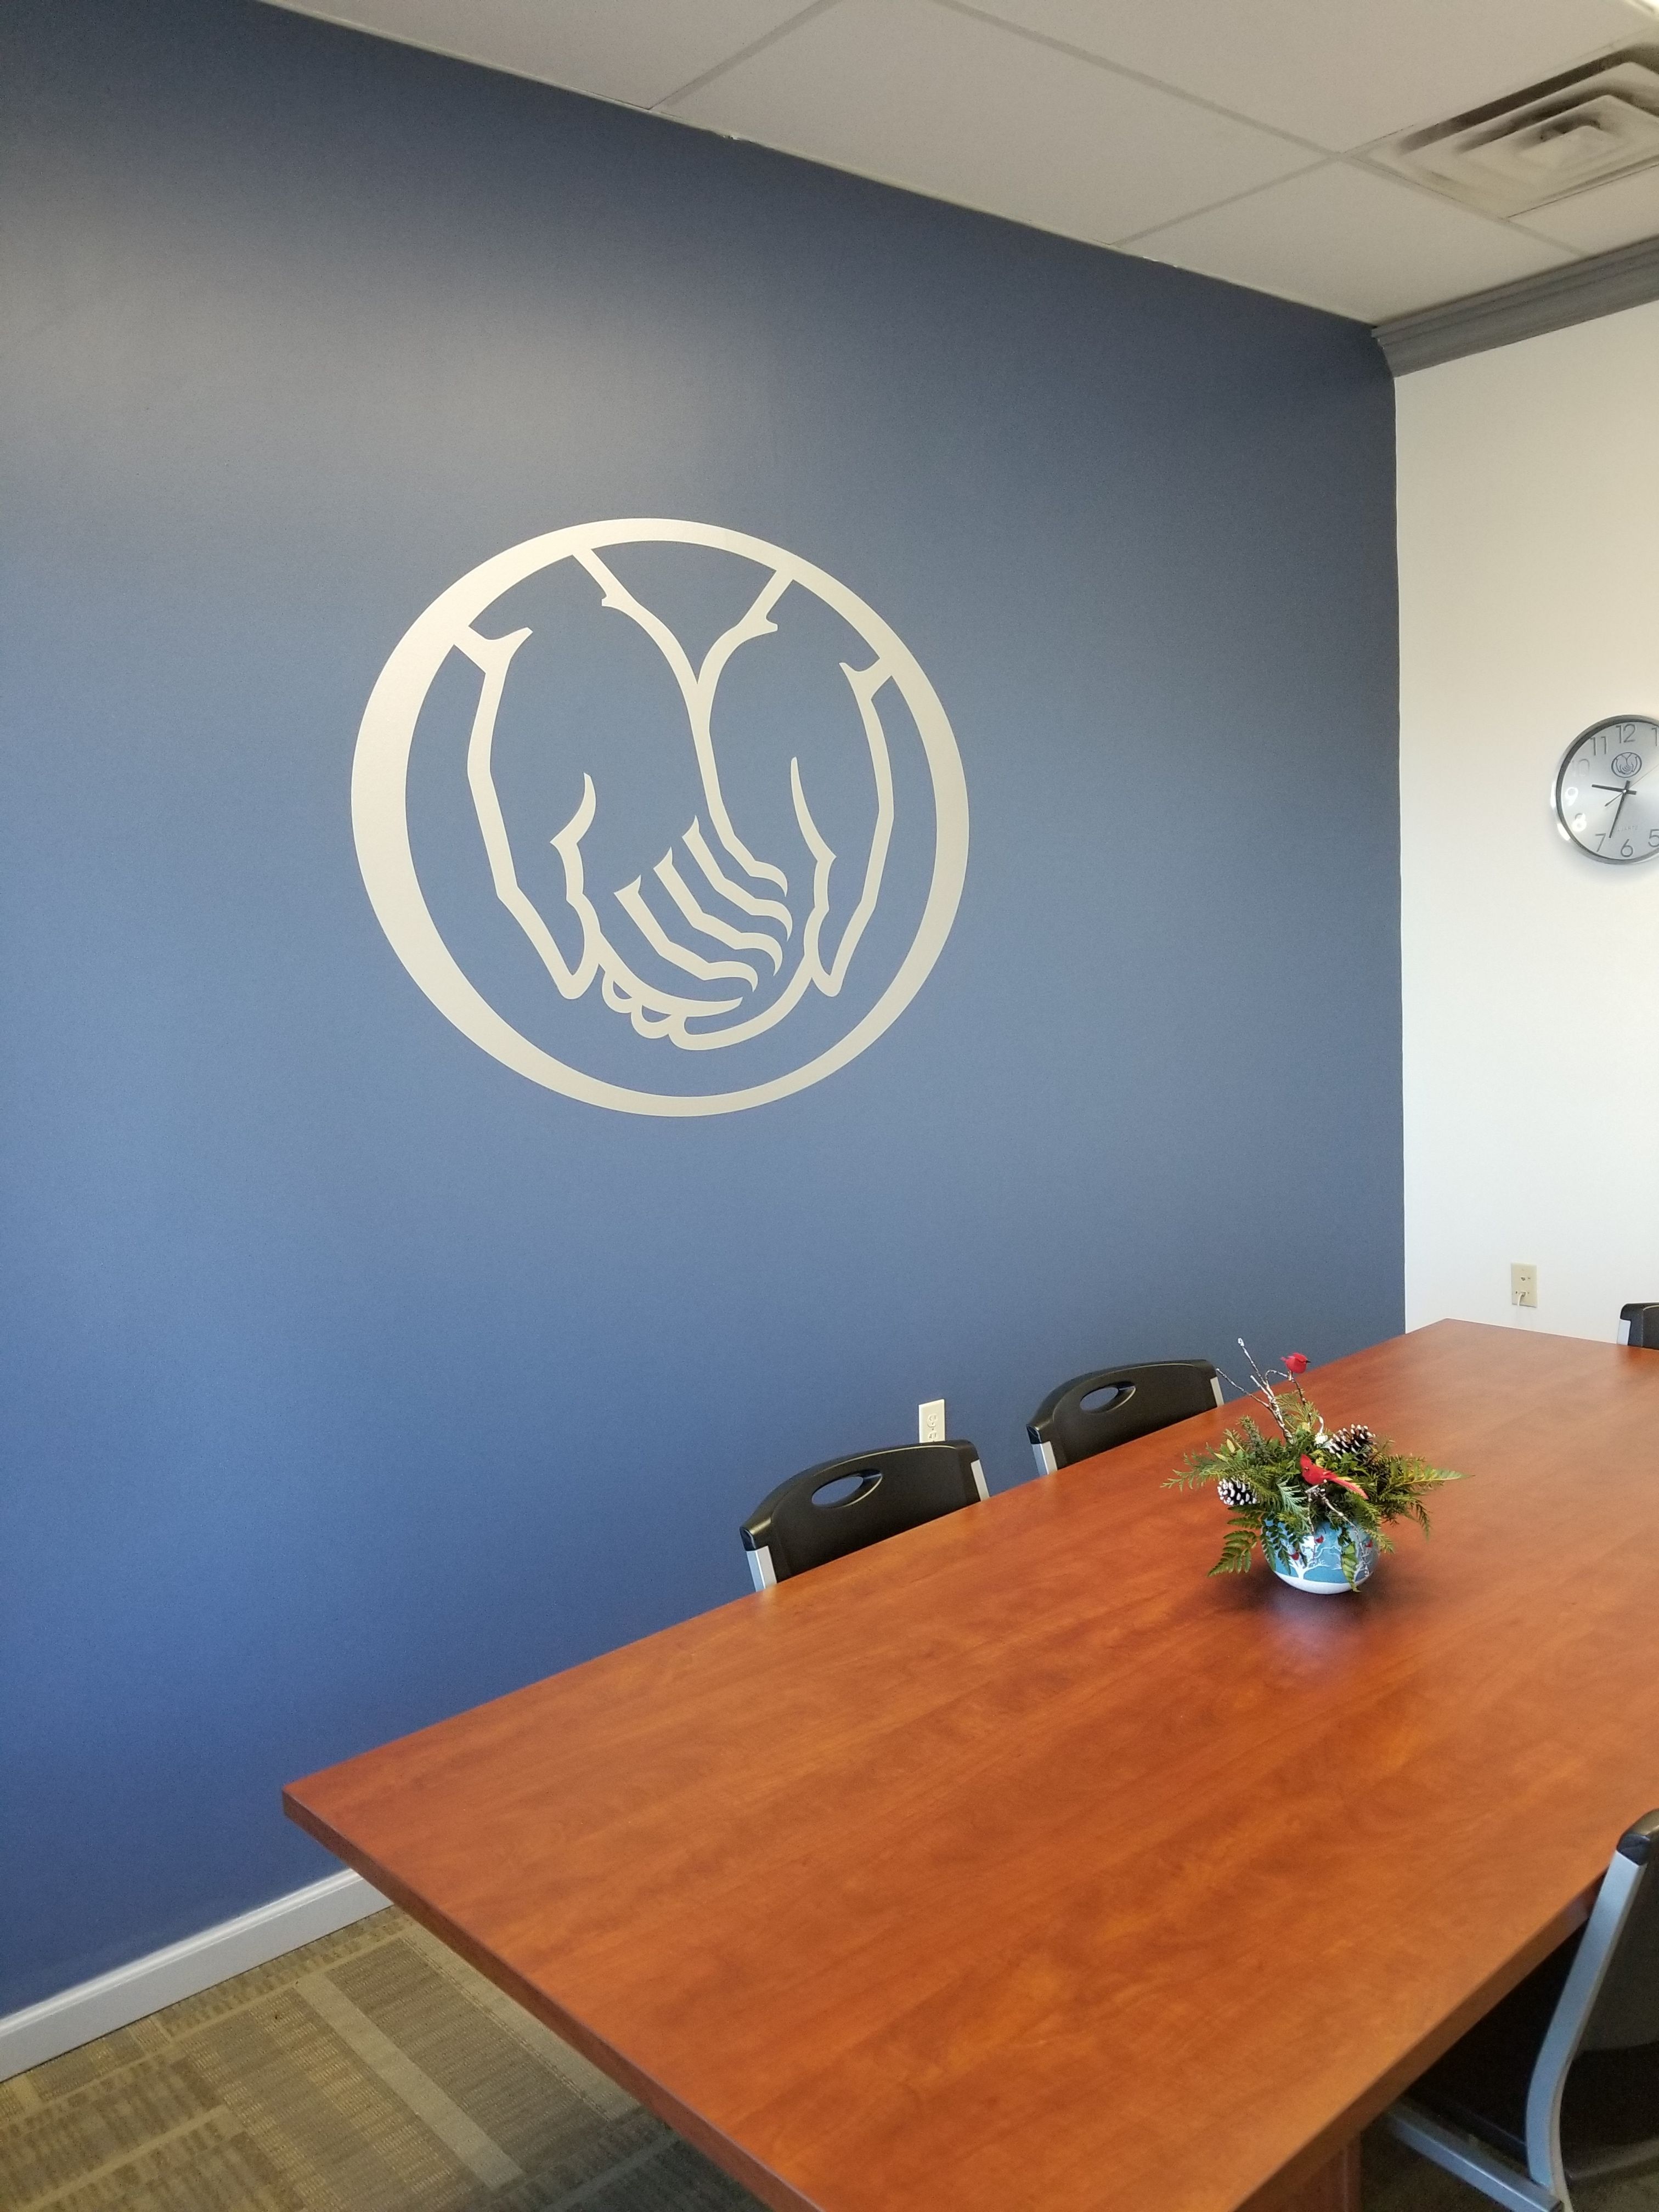 conference room -   12 insurance office decor
 ideas